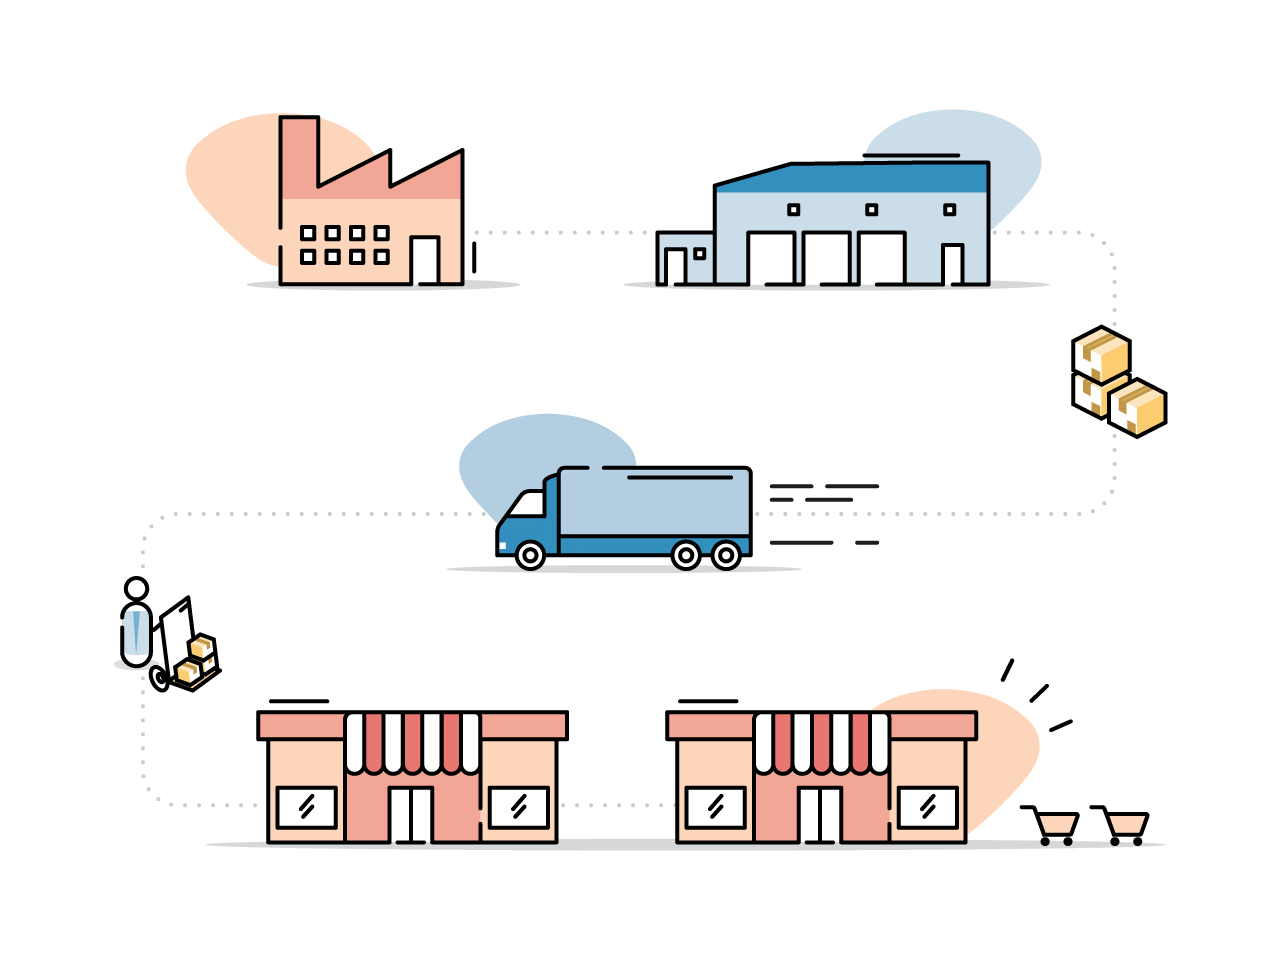 Illustration of a specialty retail supply chain